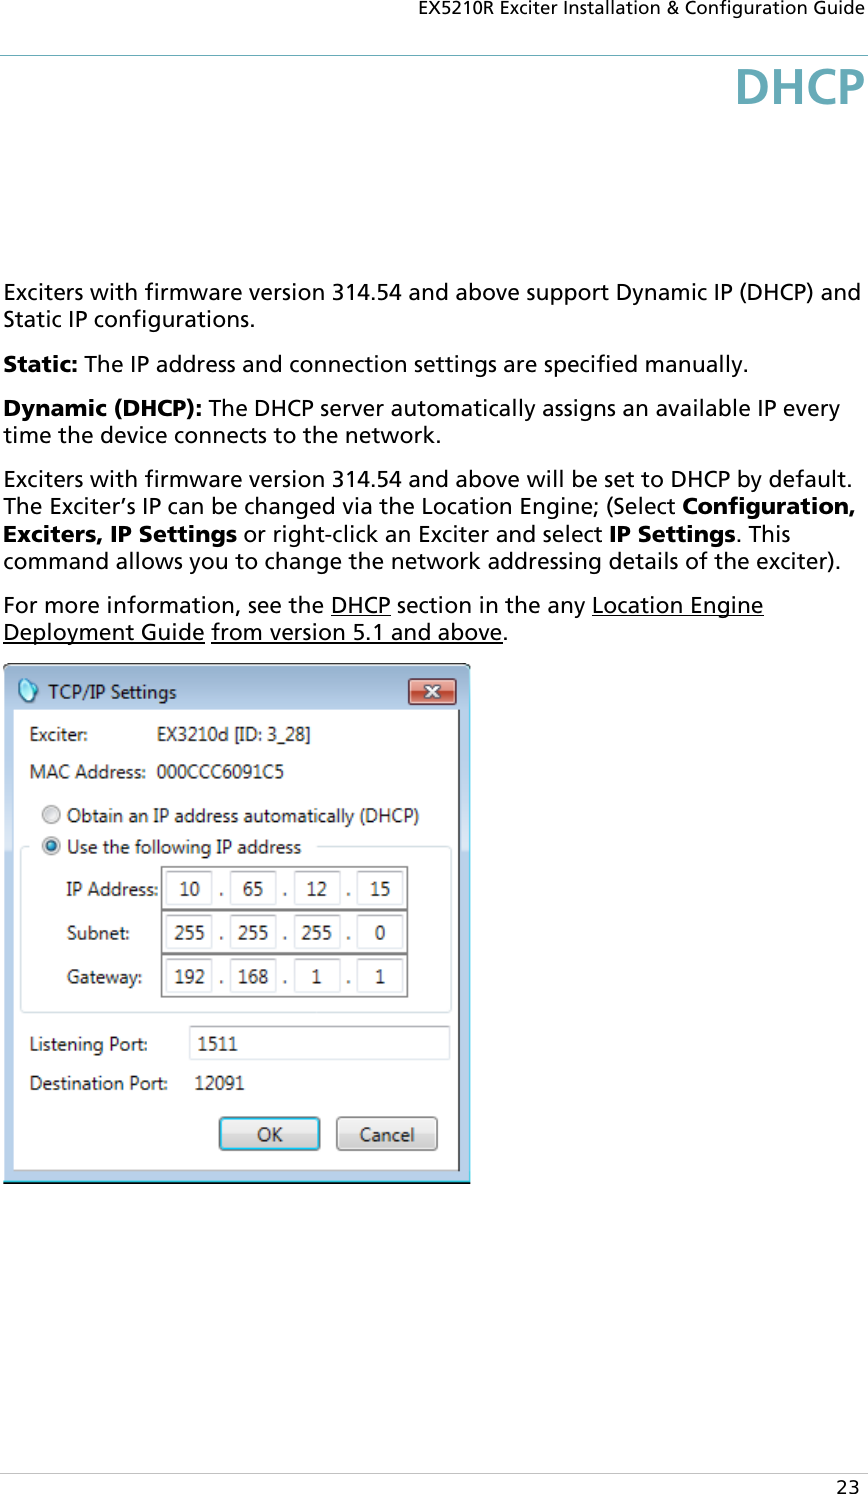 EX5210R Exciter Installation &amp; Configuration Guide  23 DHCP Exciters with firmware version 314.54 and above support Dynamic IP (DHCP) and Static IP configurations.  Static: The IP address and connection settings are specified manually. Dynamic (DHCP): The DHCP server automatically assigns an available IP every time the device connects to the network. Exciters with firmware version 314.54 and above will be set to DHCP by default. The Exciter’s IP can be changed via the Location Engine; (Select Configuration, Exciters, IP Settings or right-click an Exciter and select IP Settings. This command allows you to change the network addressing details of the exciter). For more information, see the DHCP section in the any Location Engine Deployment Guide from version 5.1 and above.   